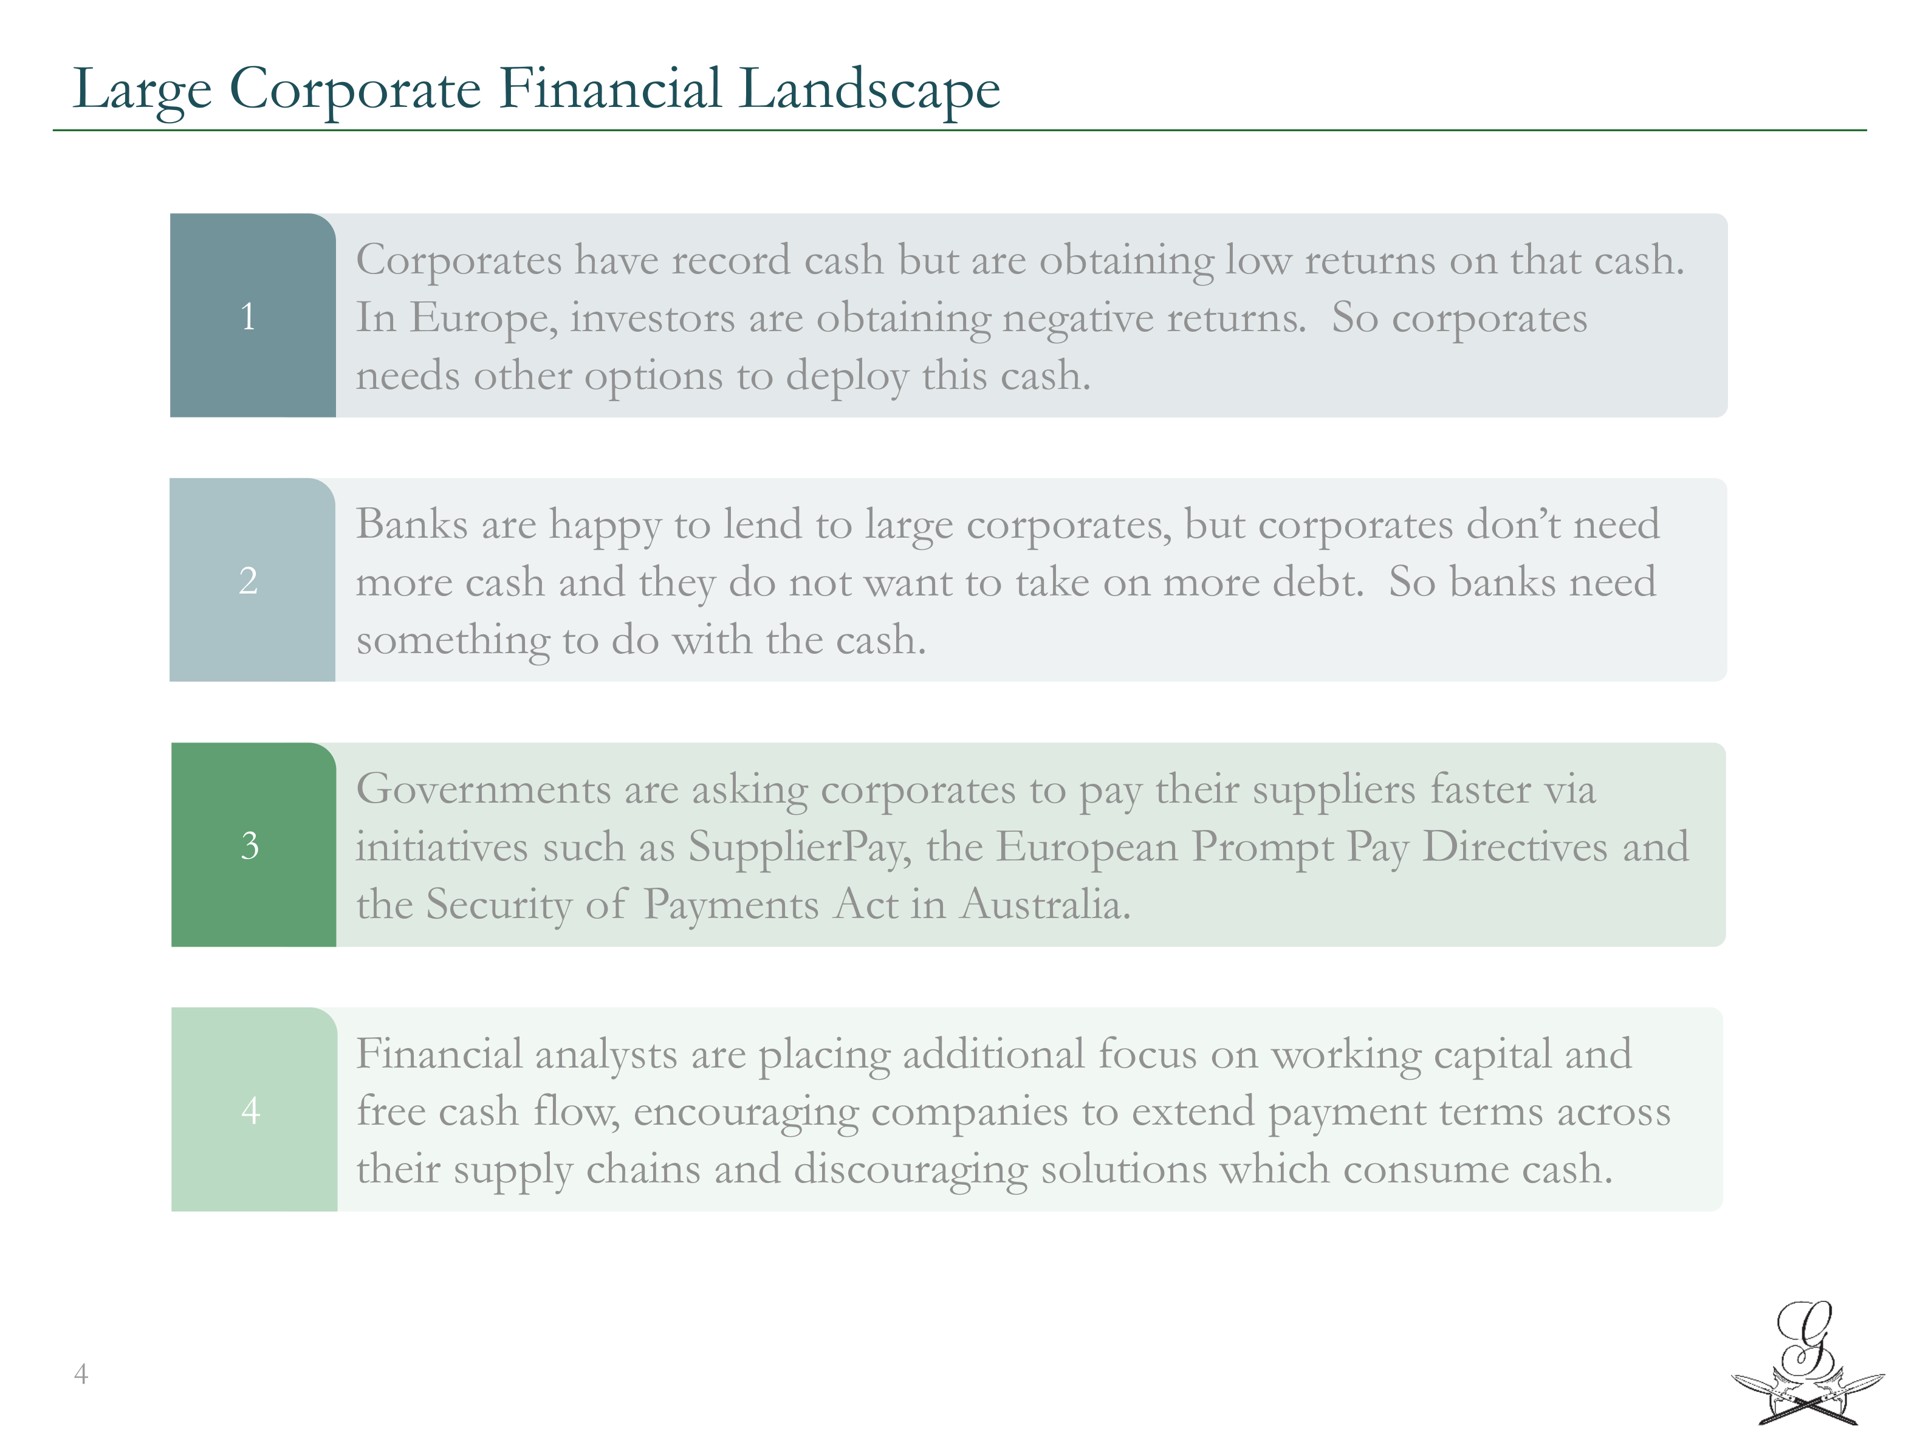 large corporate financial landscape have record cash but are obtaining low returns on that cash in investors are obtaining negative returns so needs other options to deploy this cash banks are happy to lend to large but don need more cash and they do not want to take on more debt so banks need something to do with the cash governments are asking to pay their suppliers faster via initiatives such as the prompt pay directives and the security of payments act in financial analysts are placing additional focus on working capital and free cash flow encouraging companies to extend payment terms across their supply chains and discouraging solutions which consume cash | Greensill Capital